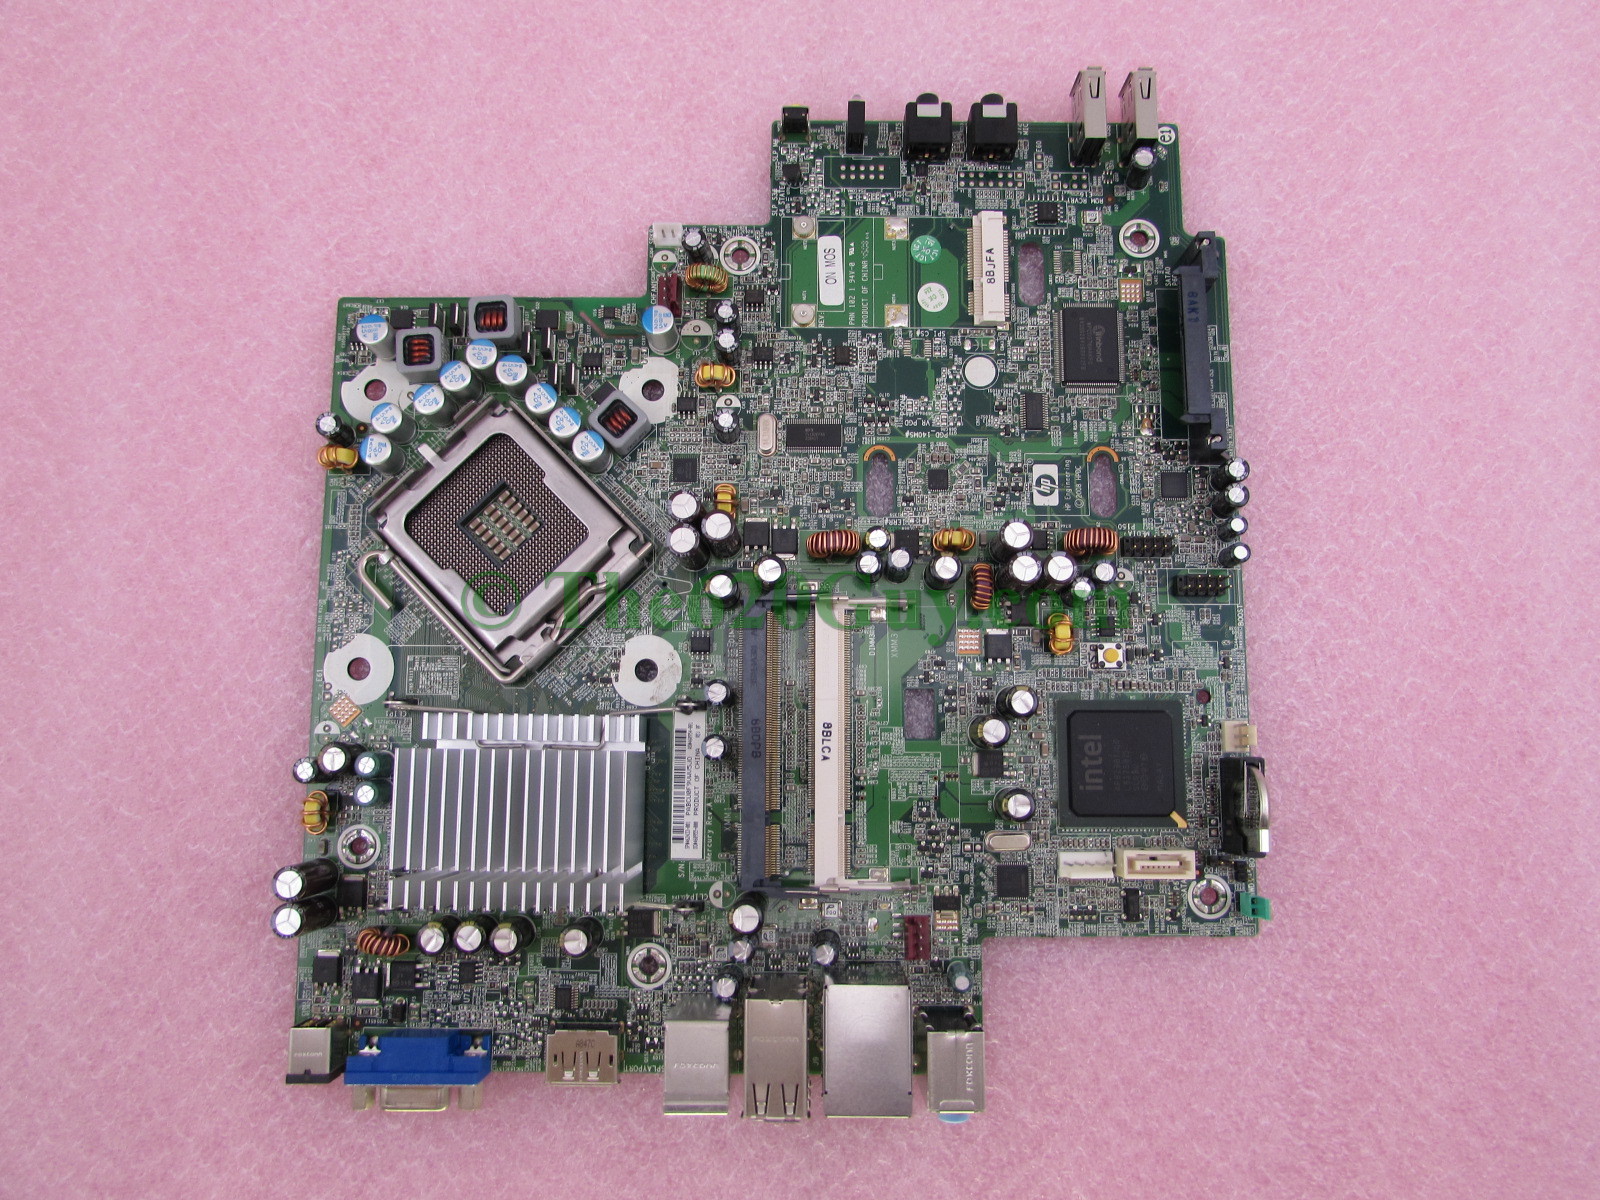 amusement degree Independence HP DC7900 Ultra Slim Desktop Small Form Factor Motherboard 462433-001  460954-001 - The620Guy.com